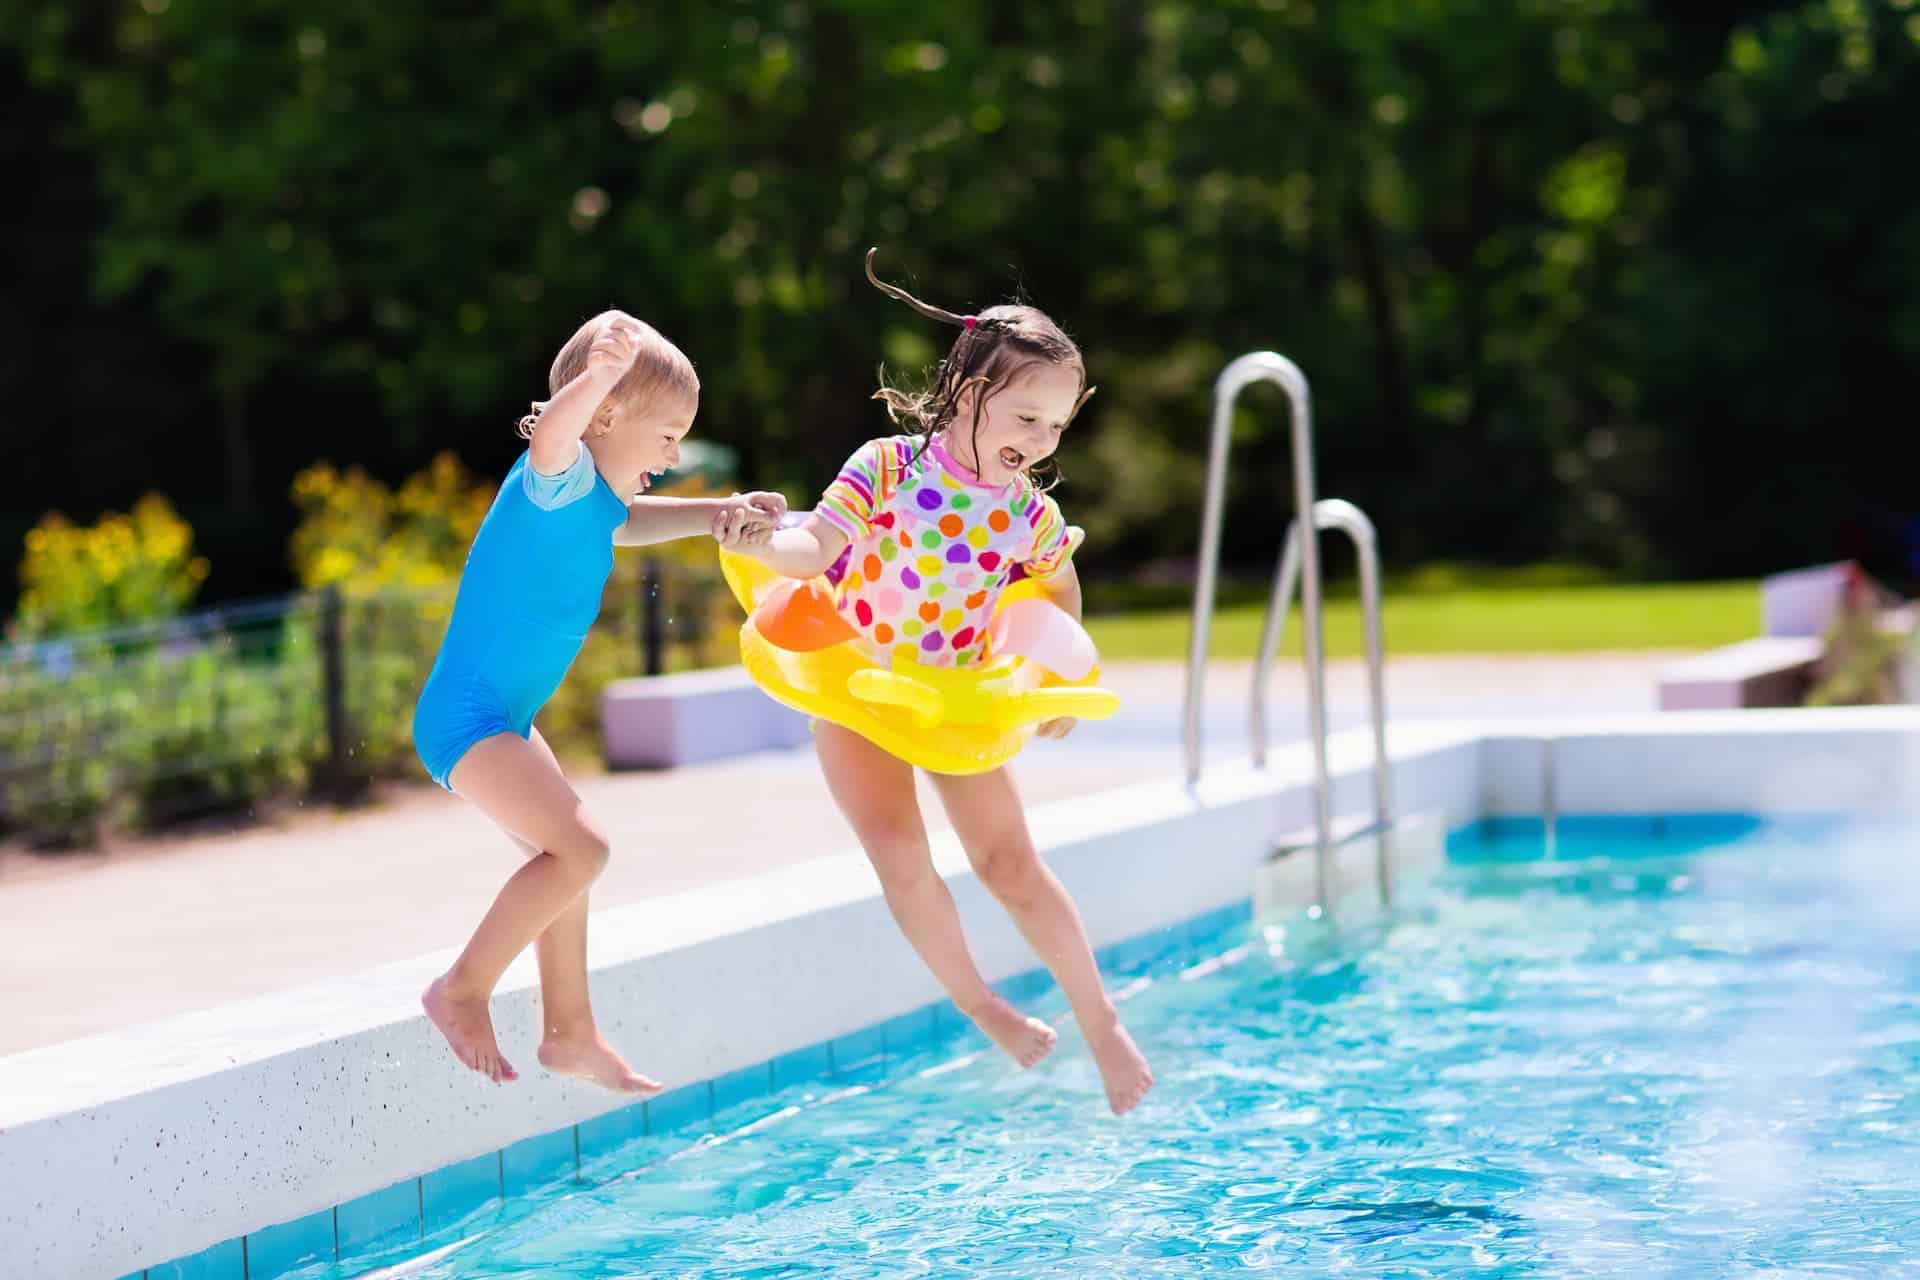 The right inground pool loan makes for happy inground pool ownership for the whole family.